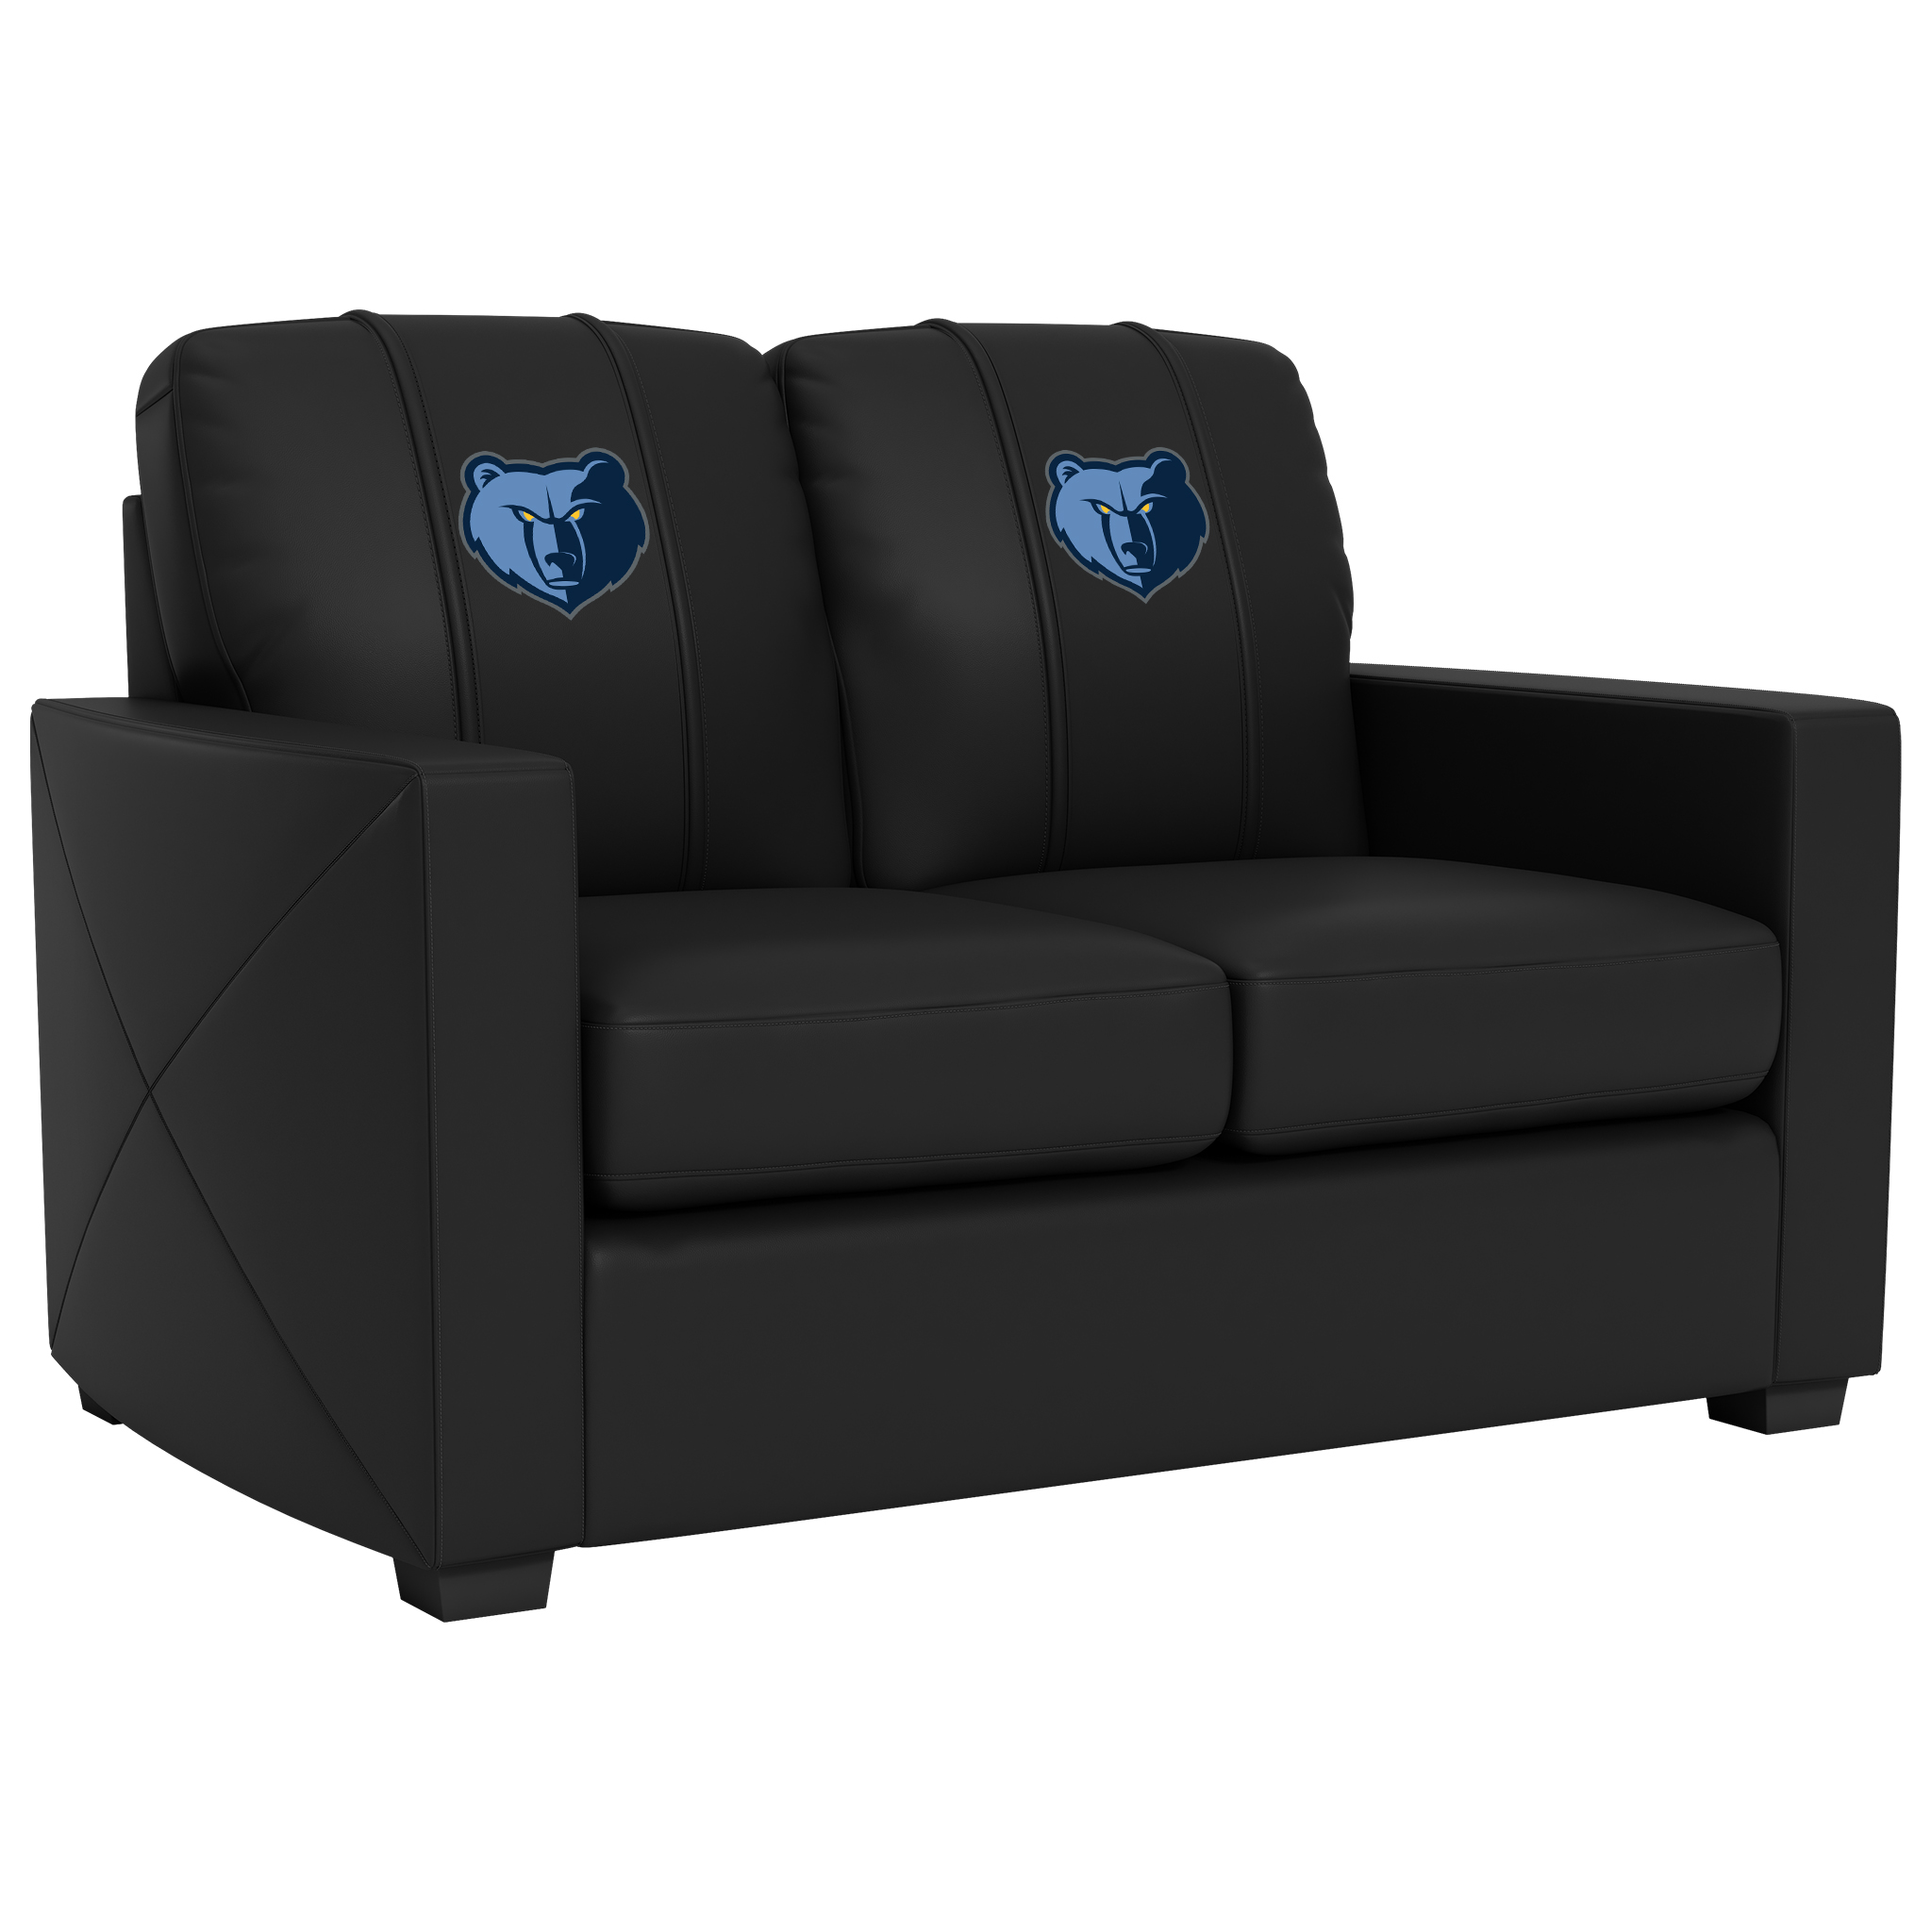 Memphis Grizzlies  Silver Loveseat with Memphis Grizzlies Primary Logo